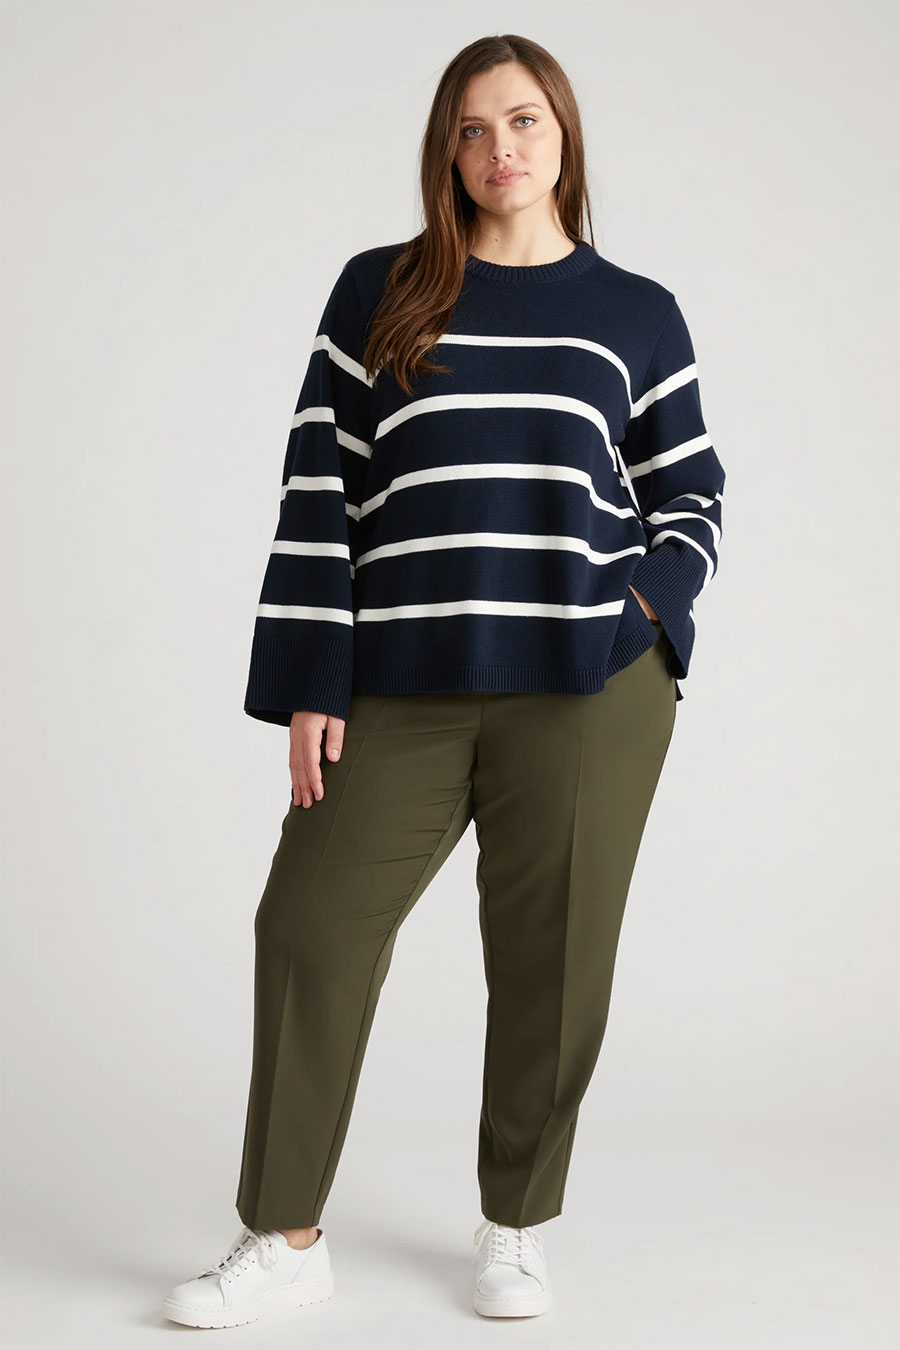 Olive and Nautical Navy